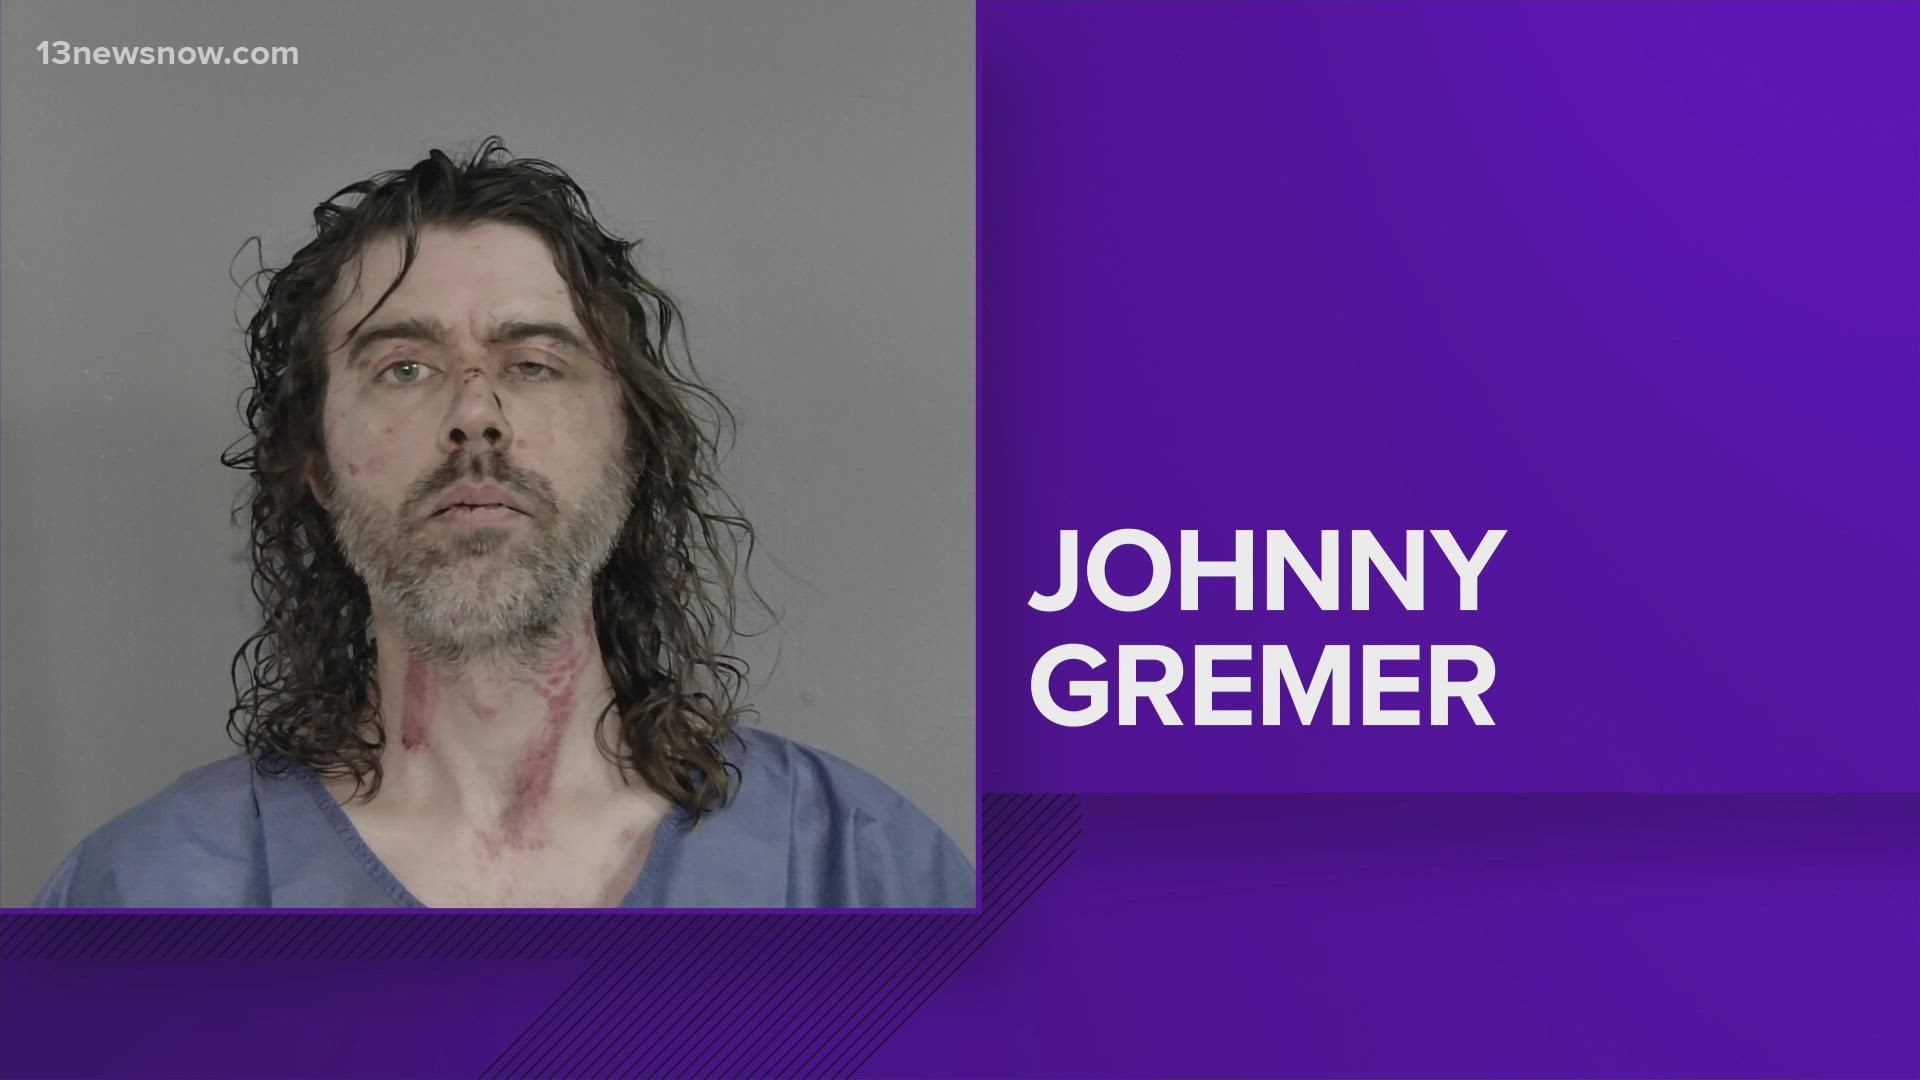 Court documents say the two got into a fight and at some point, Gremer reportedly got a sword with a sheath and hit his neighbor’s arm with it.